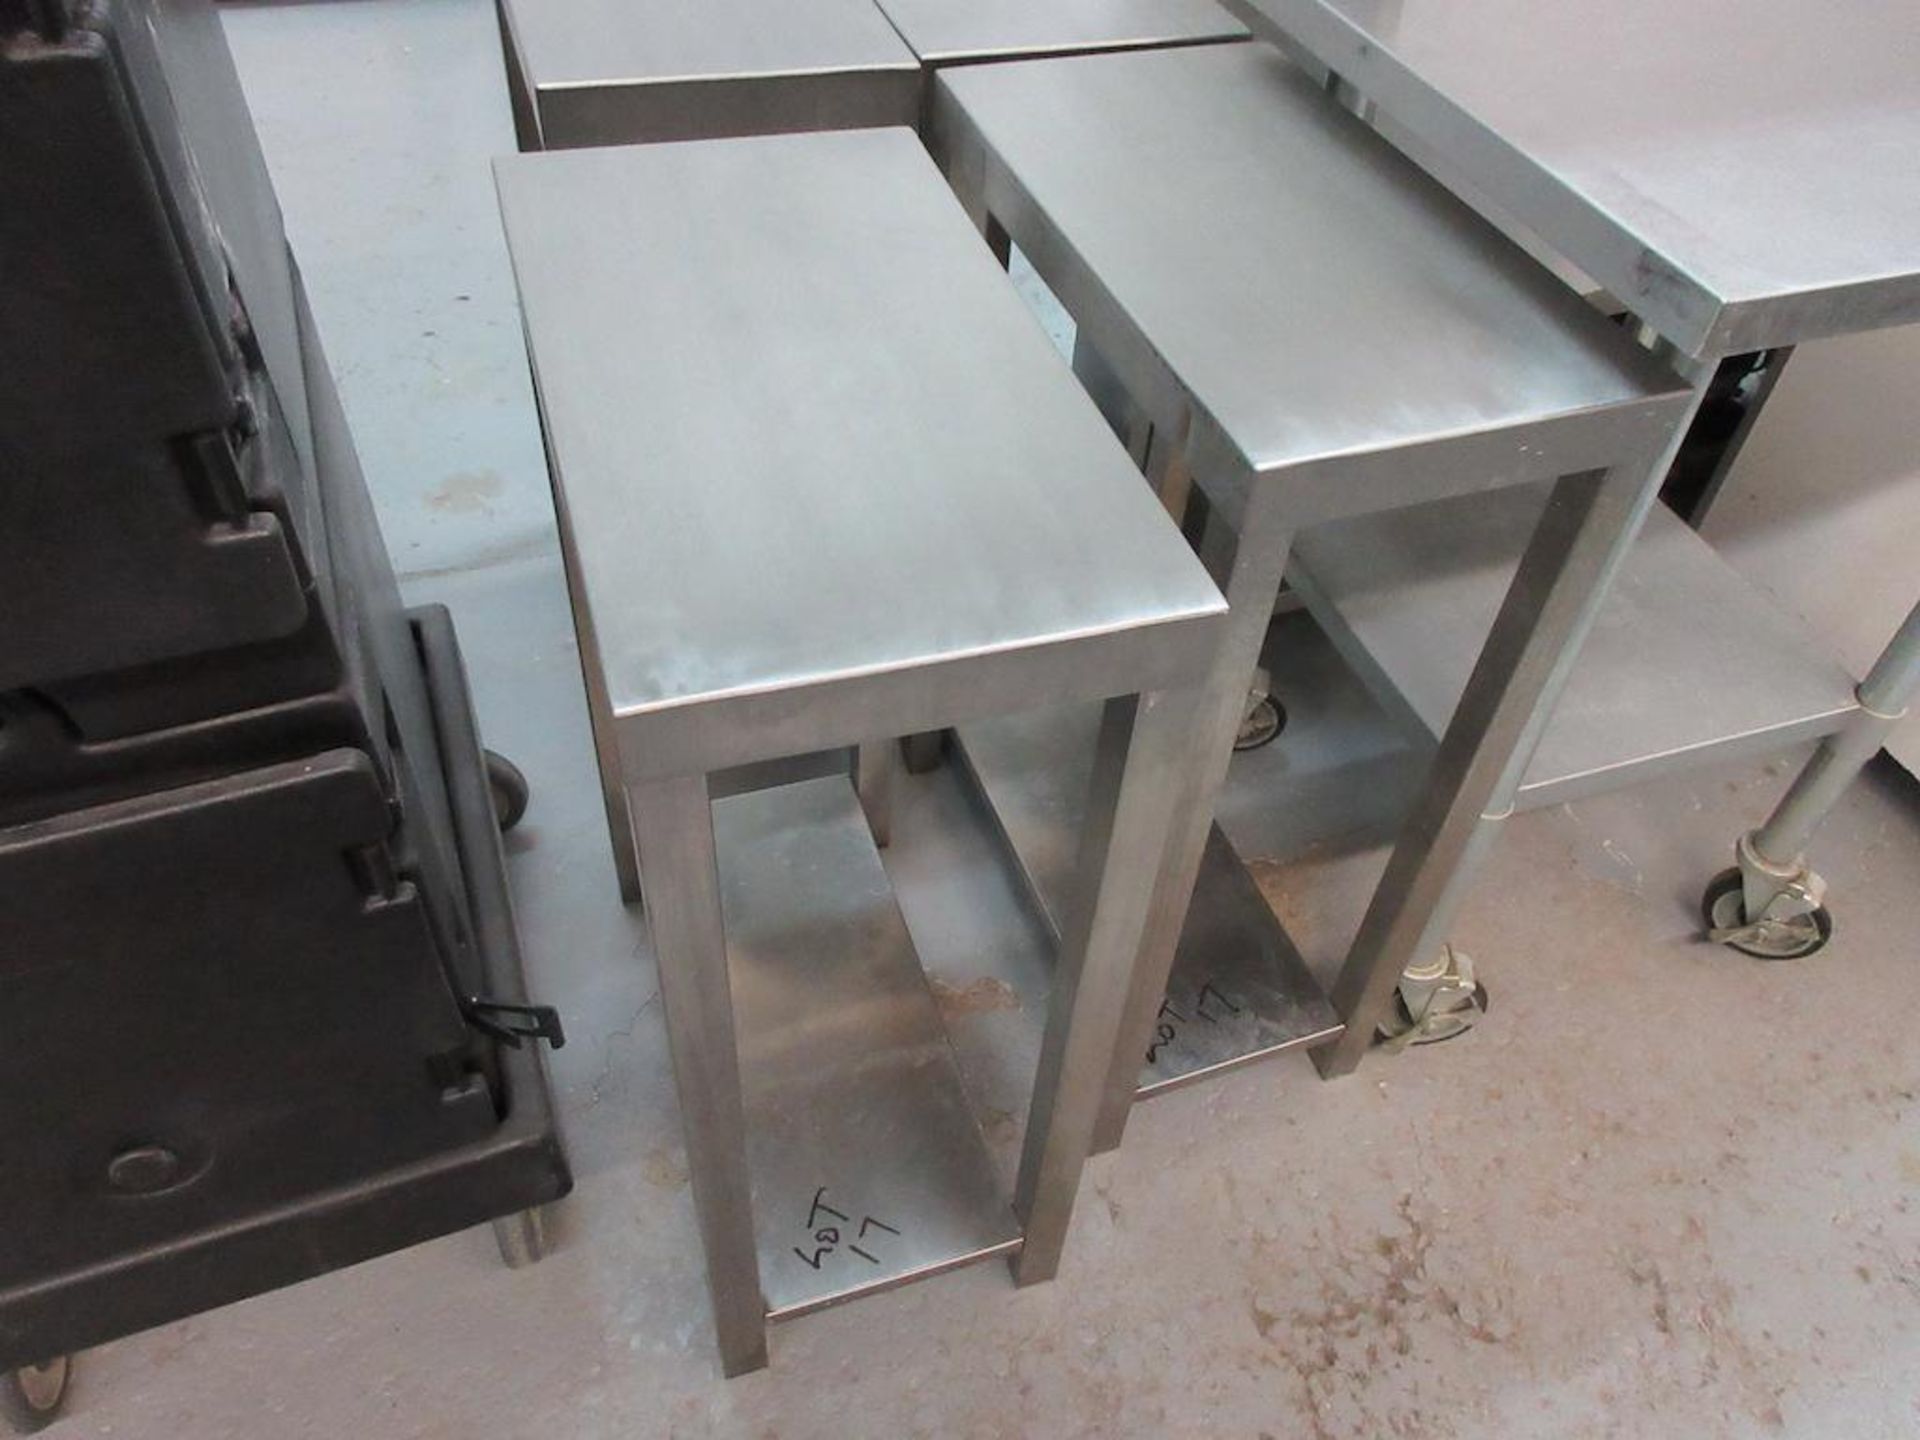 Lot 5 stainless steel prep tables: 24"x24" portable, (4) 12"x22" stationary - Image 3 of 4